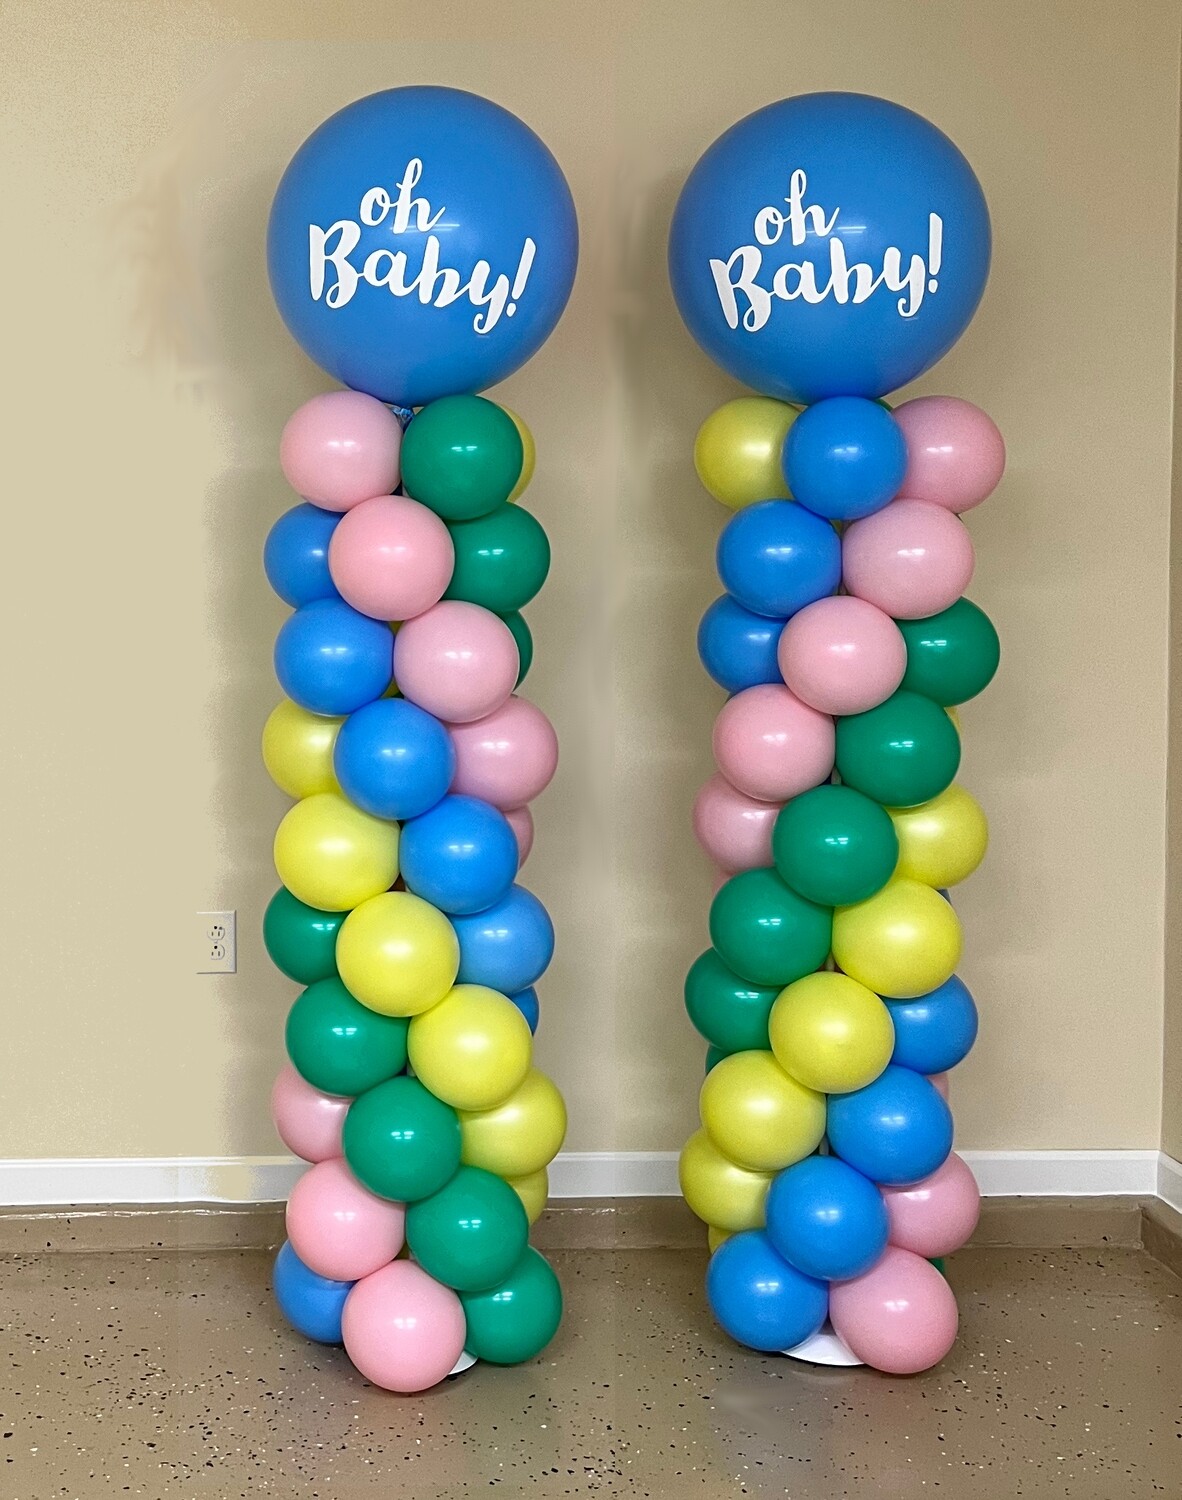 TWO Oh baby balloon columns with blue topper